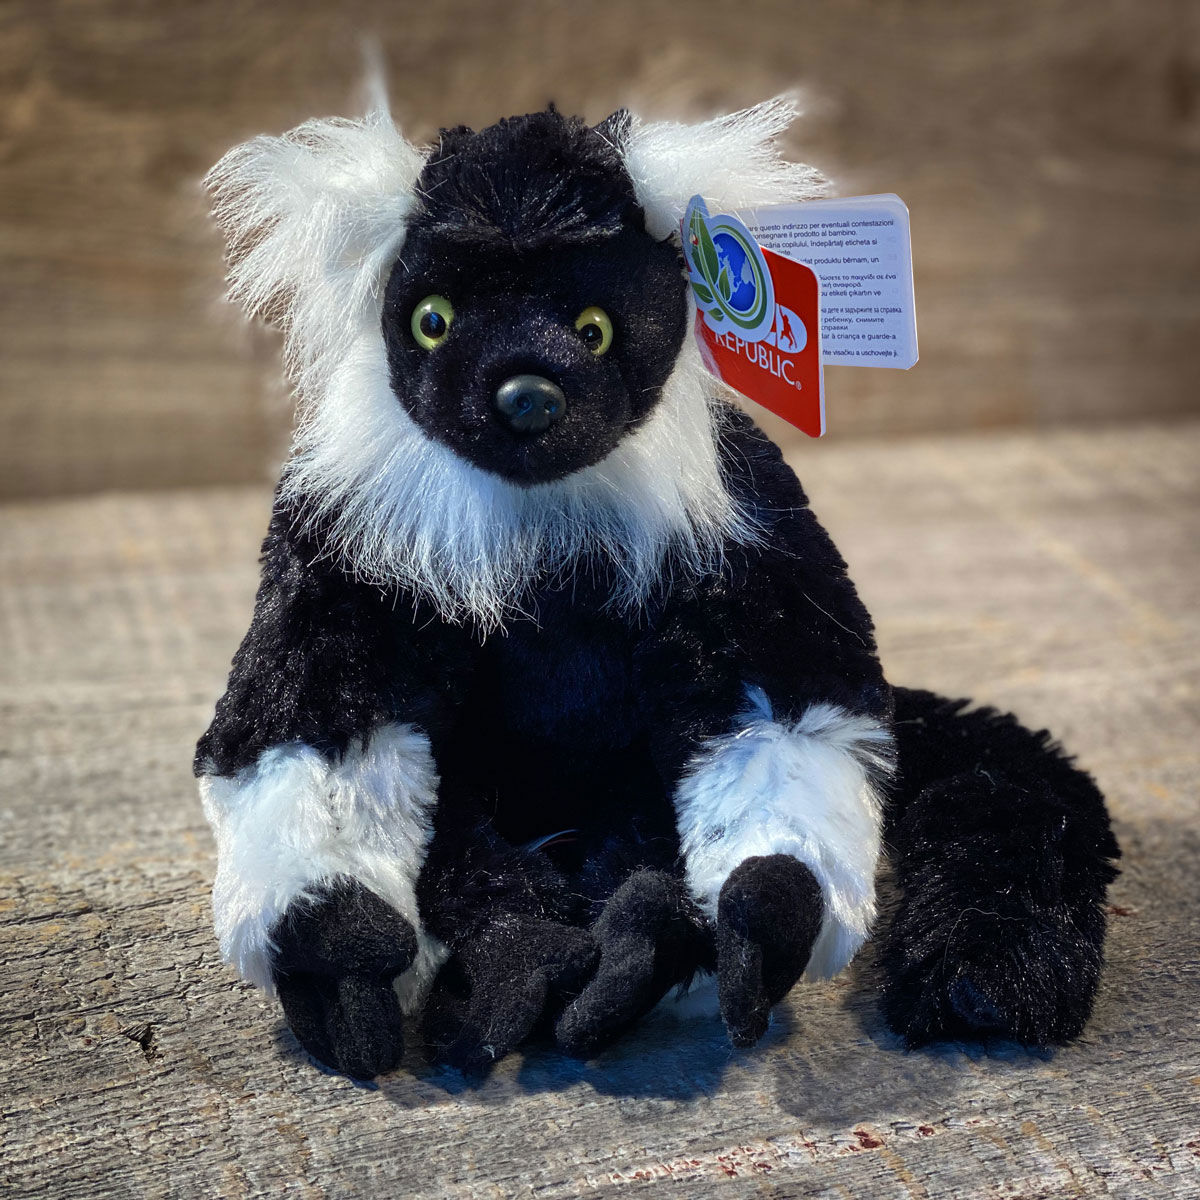 Stuffed lemur: Every purchase plants a tree - Arbor Day Foundation